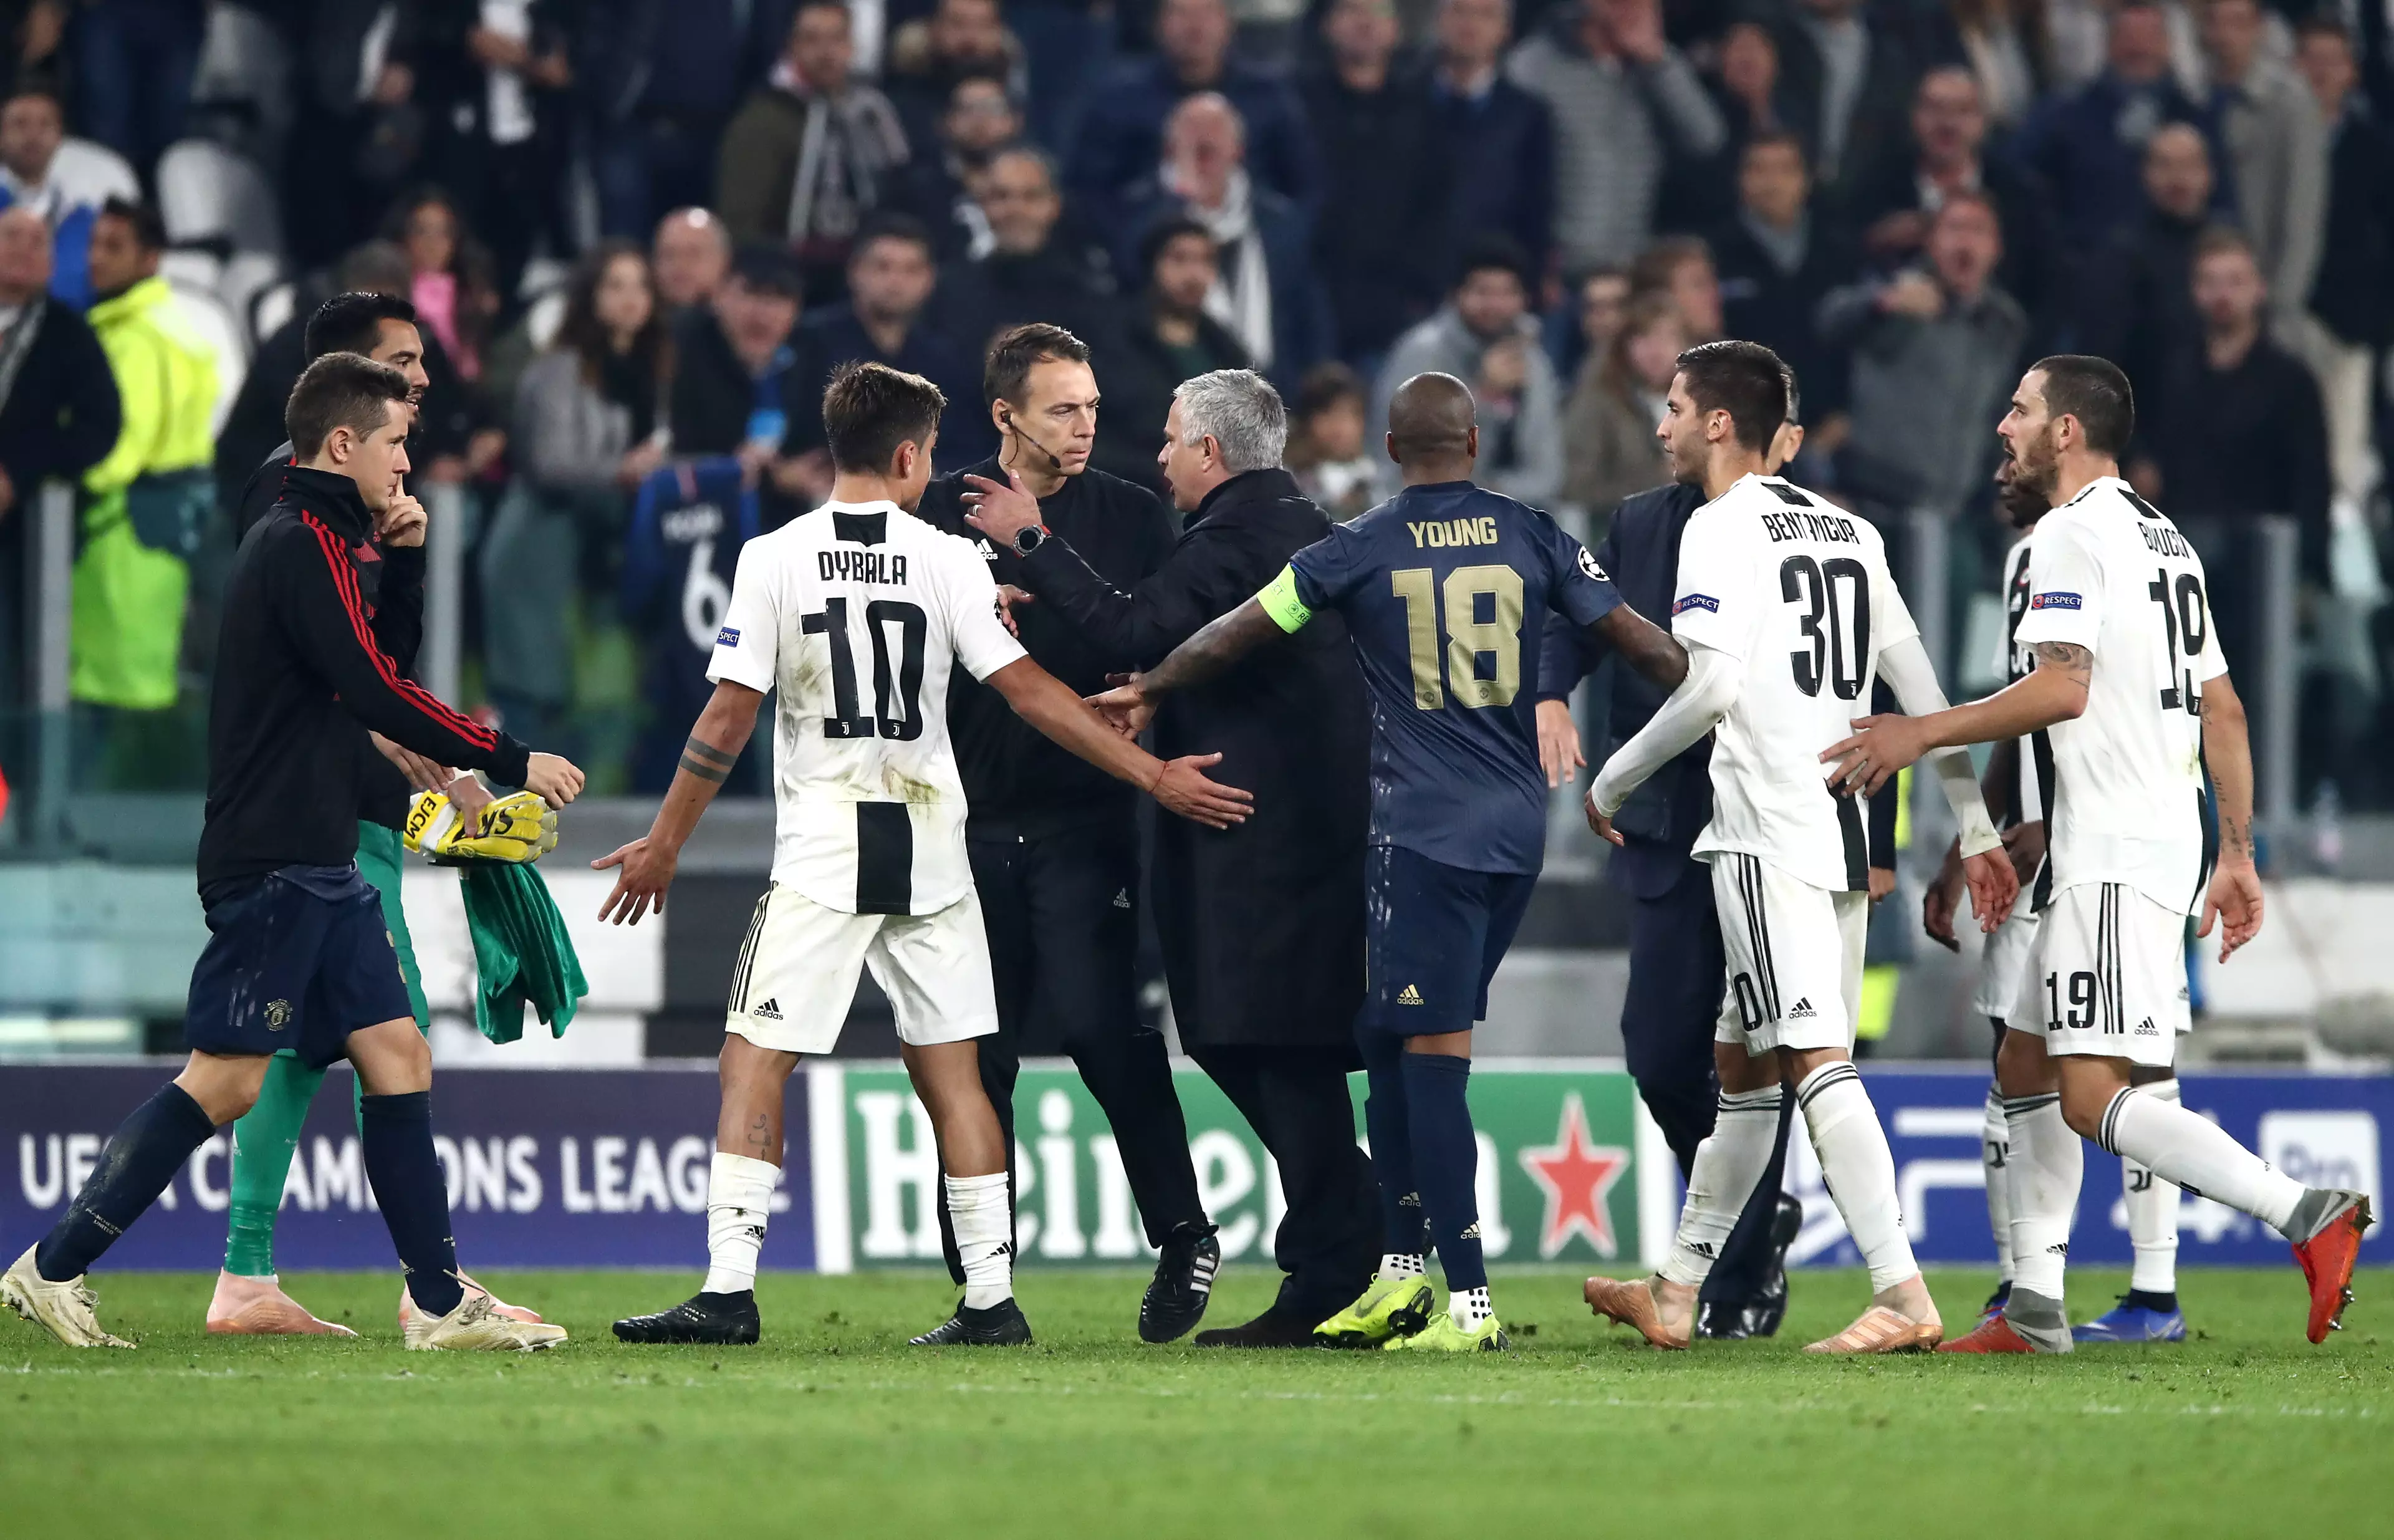 Juventus players surround Mourinho after his final whistle antics. Image: PA Images